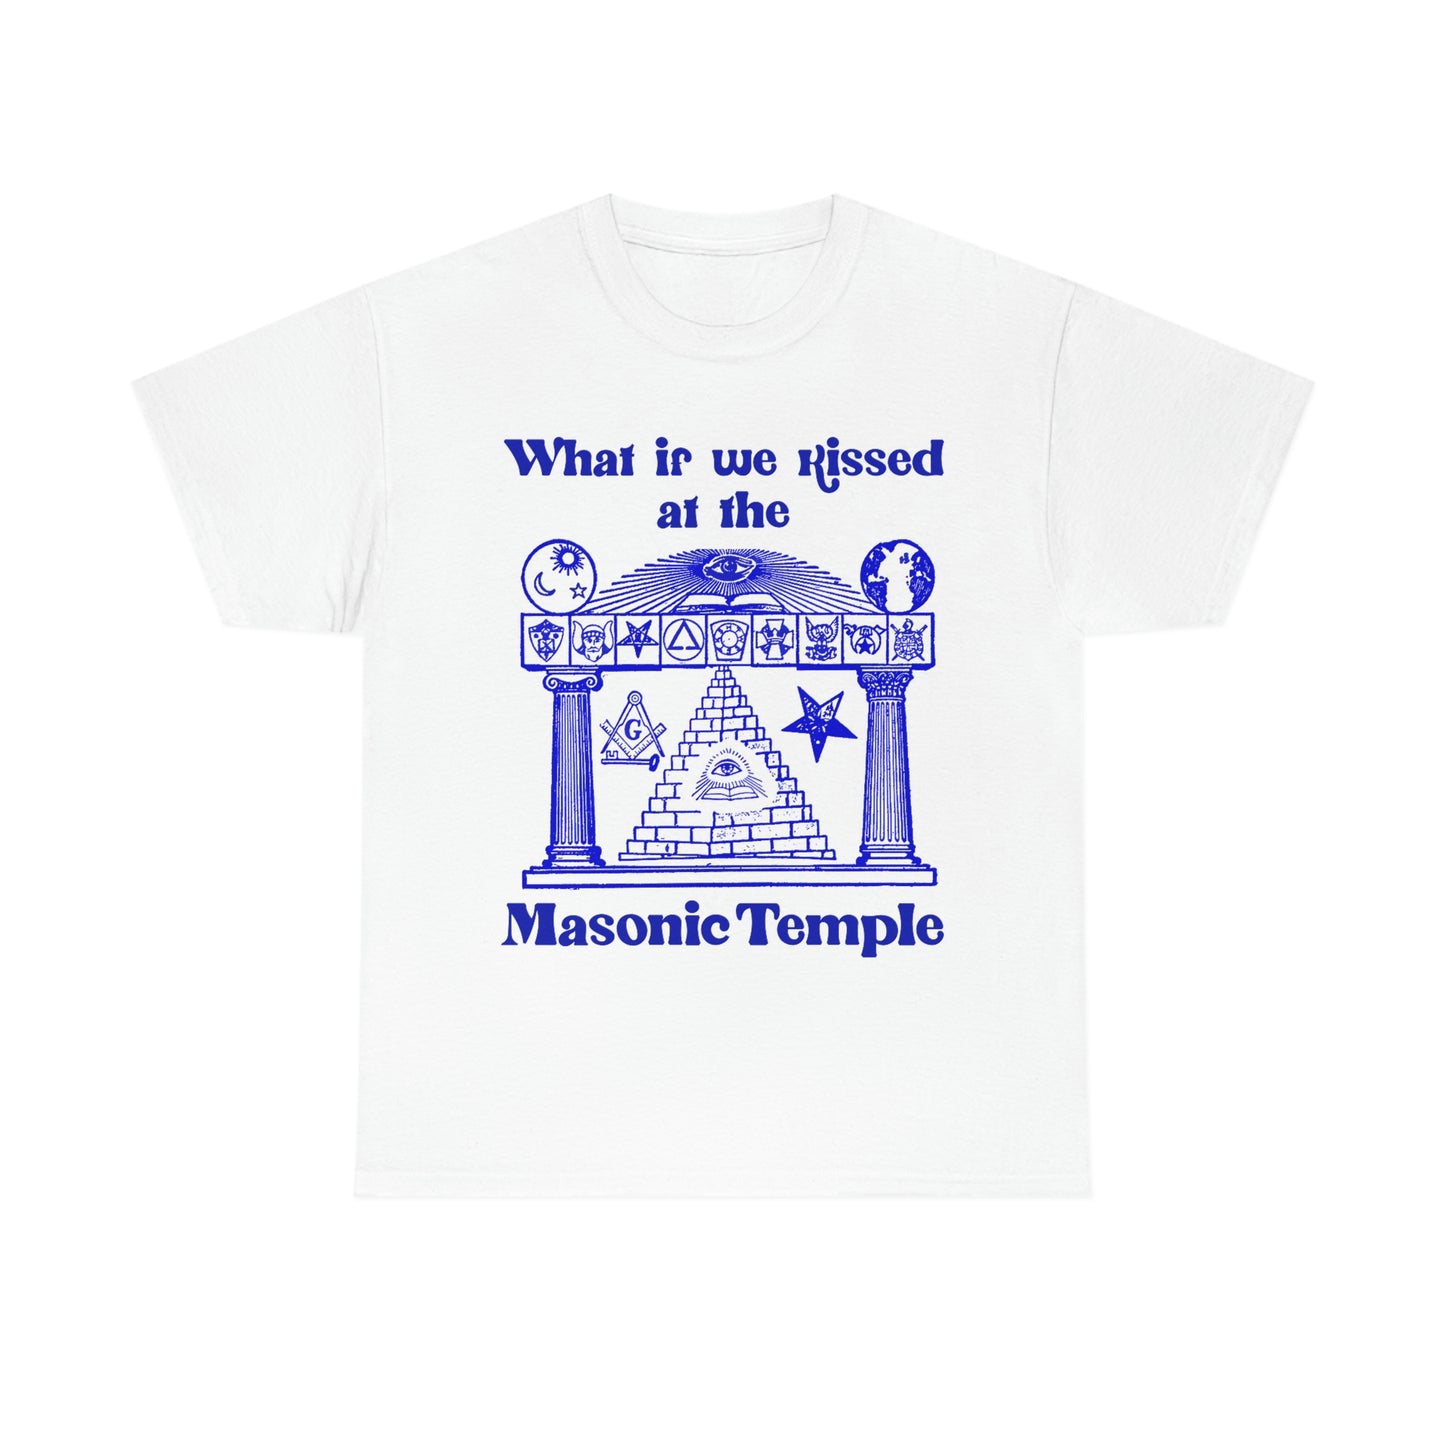 What If We Kissed At The Masonic Temple.